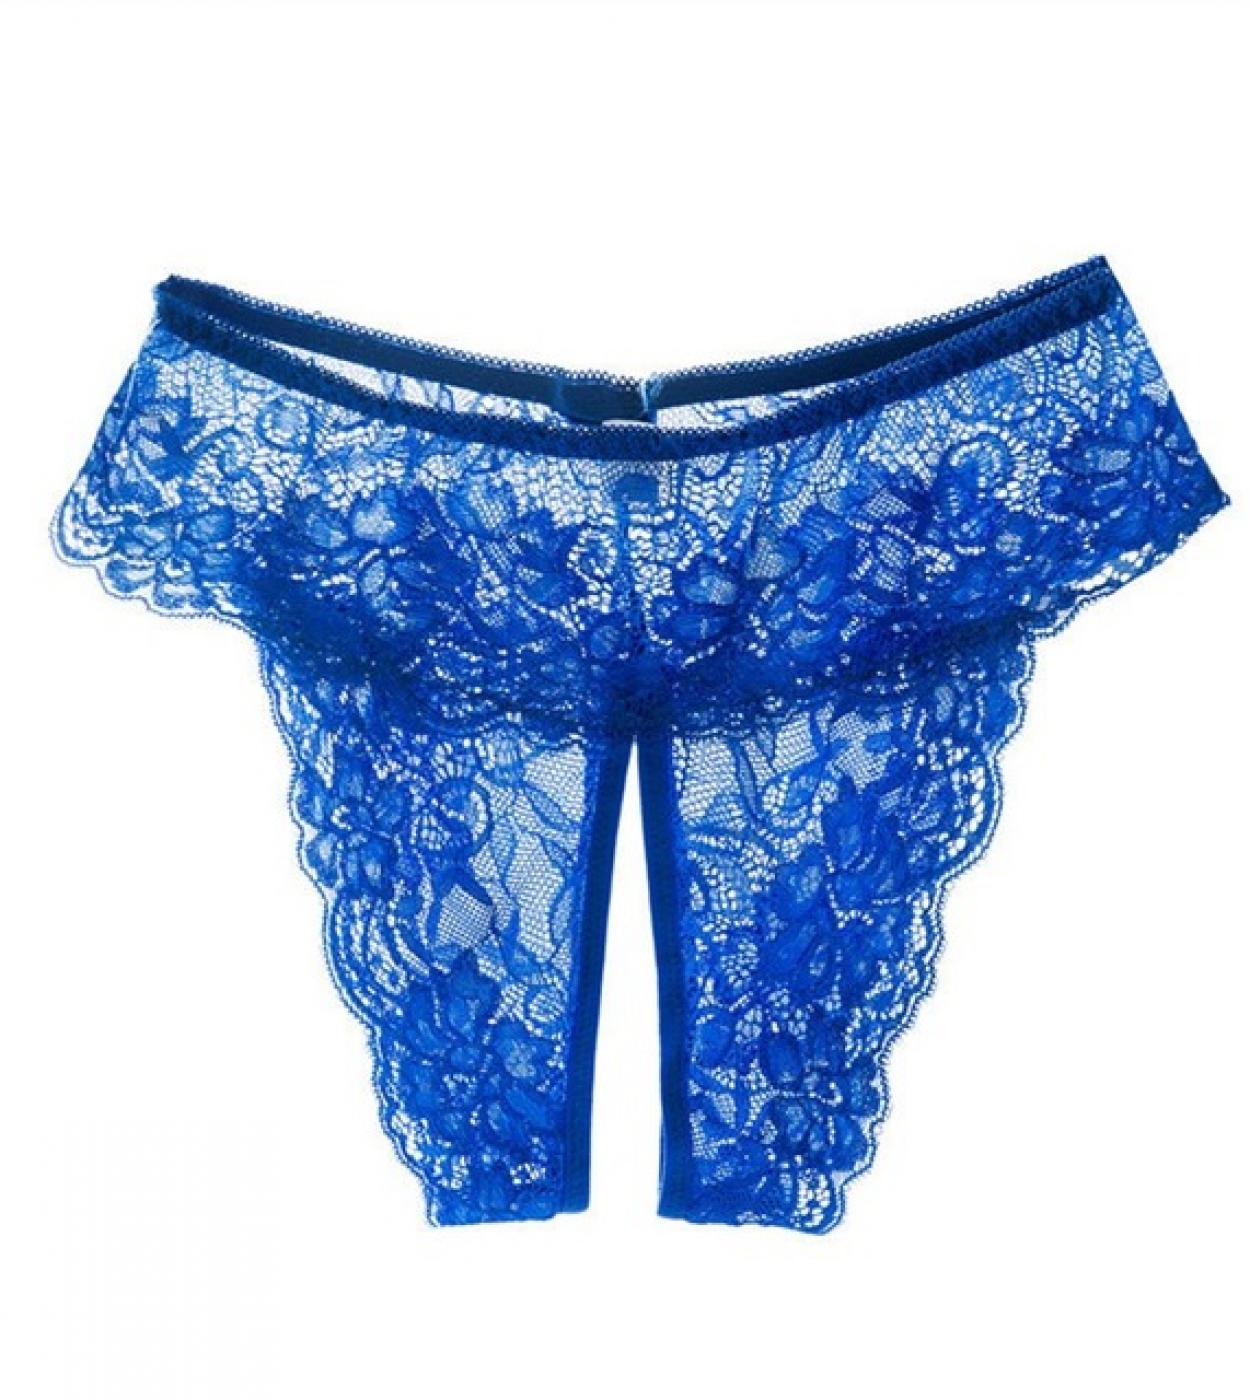 TMP1105 Open Crotch Panties with Lingerie Lace G-String T-Back Briefs  Panties for Women (Color : Blue, Size : One Size)